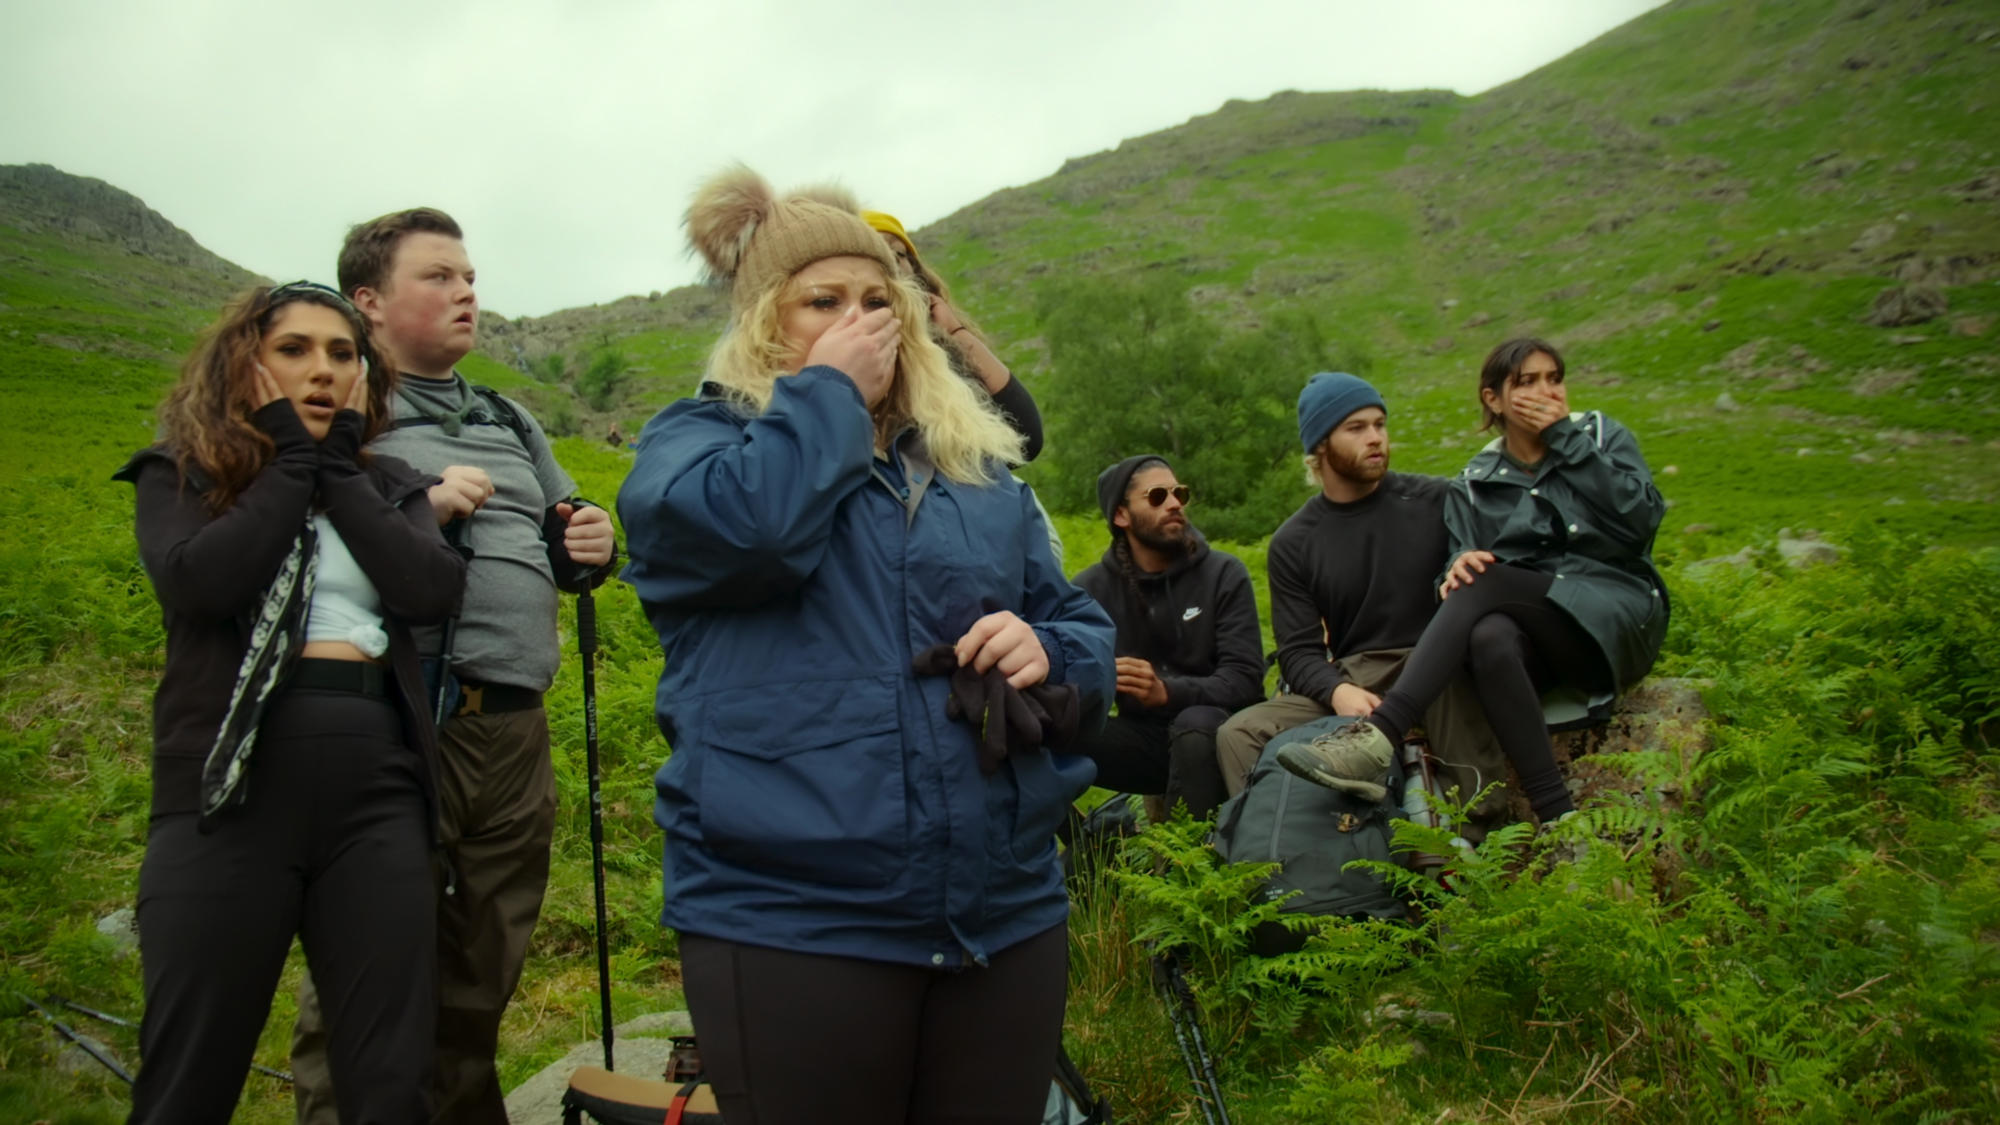 A group of people look shocked while hiking on a green hill. 